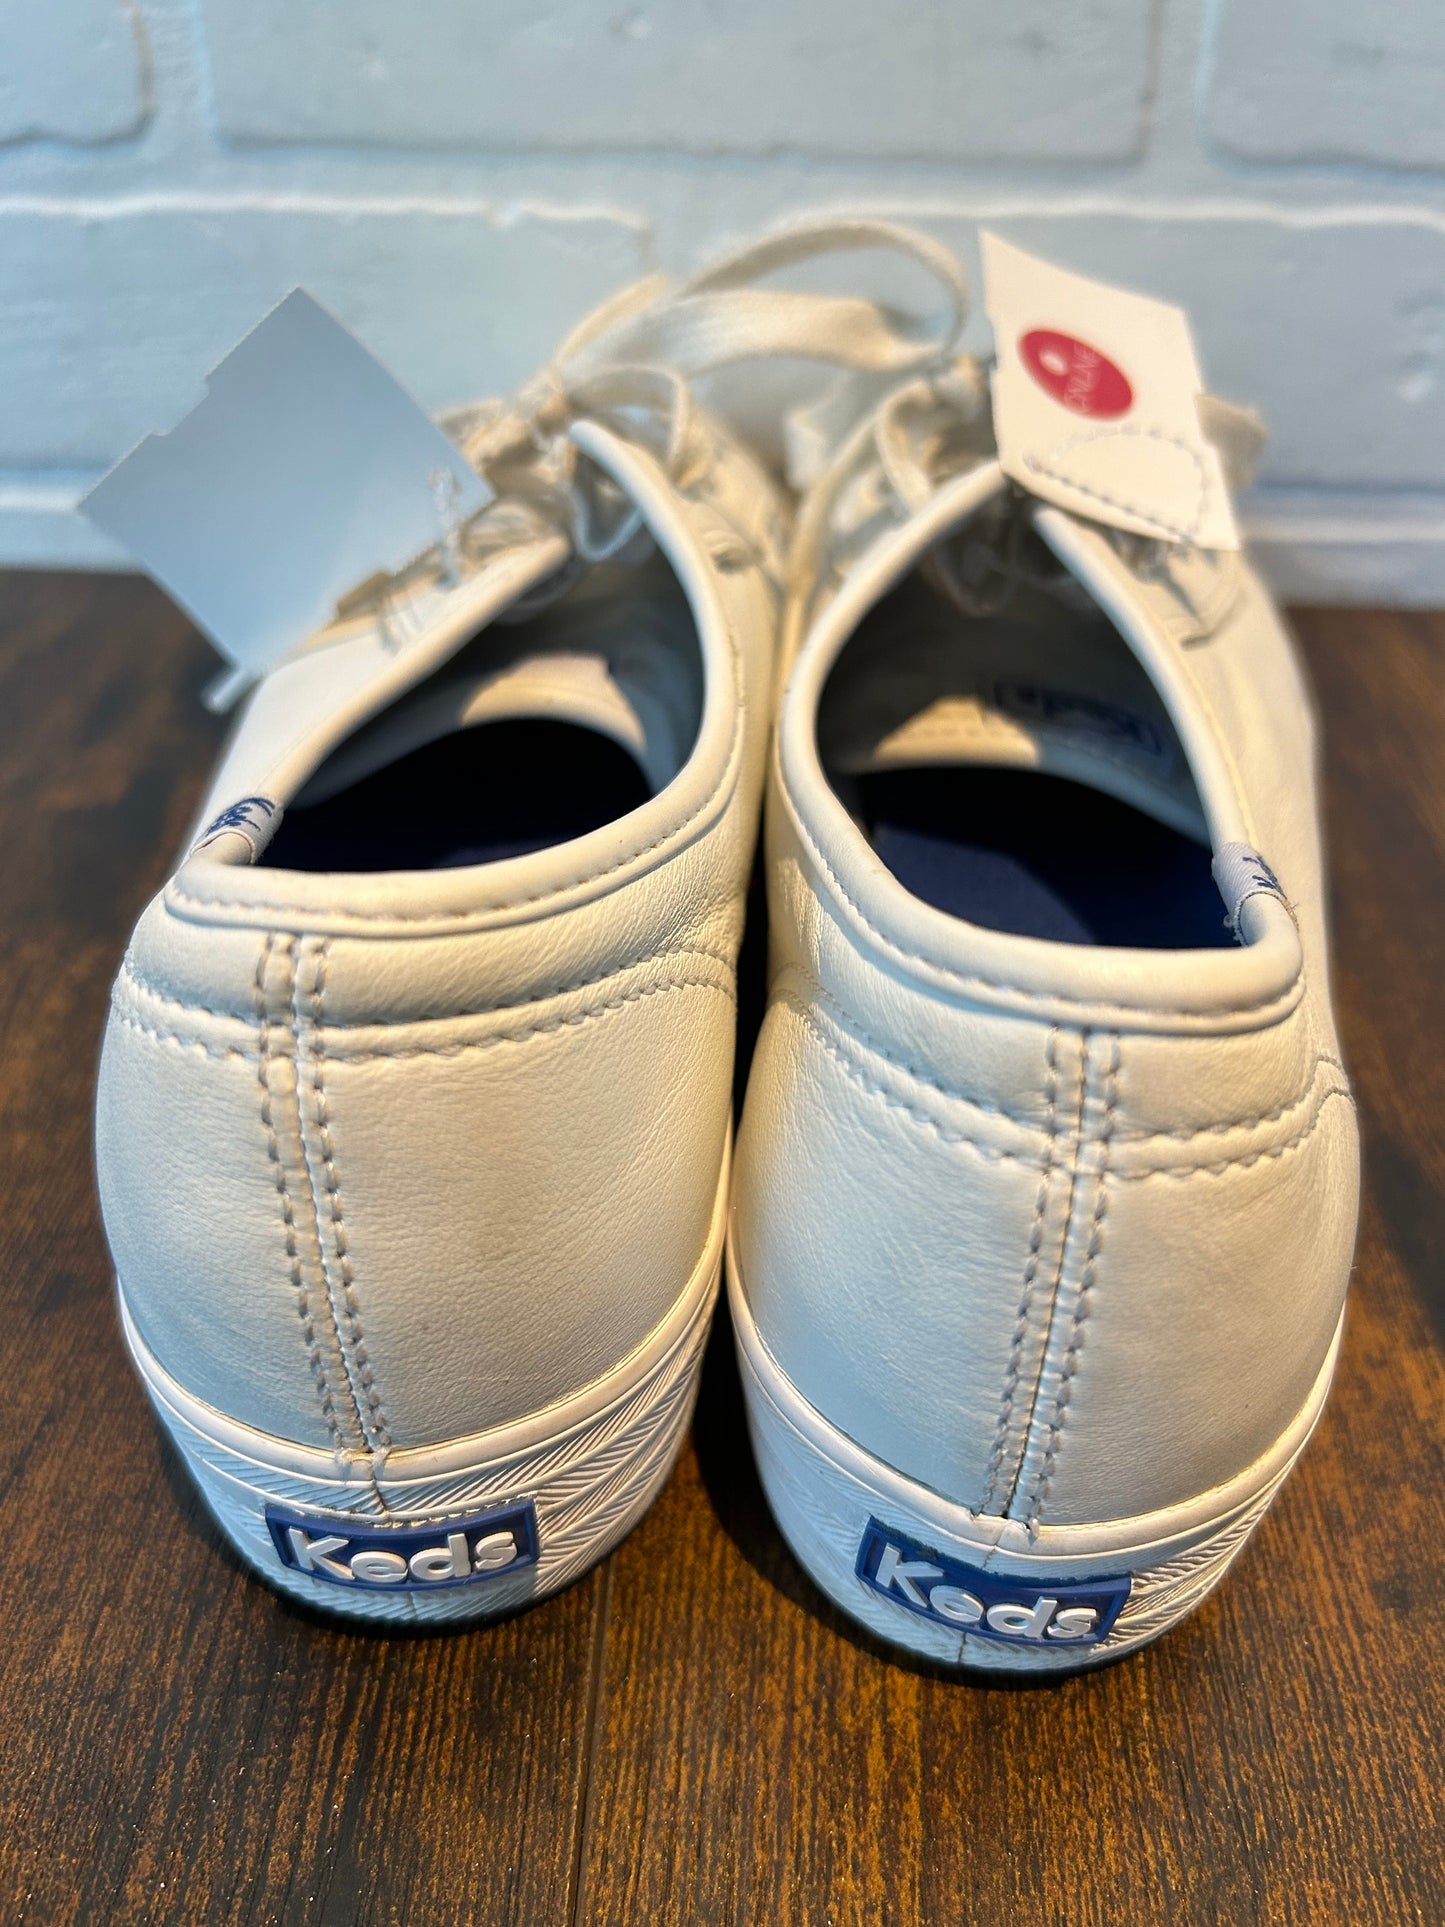 White Shoes Sneakers Keds, Size 9